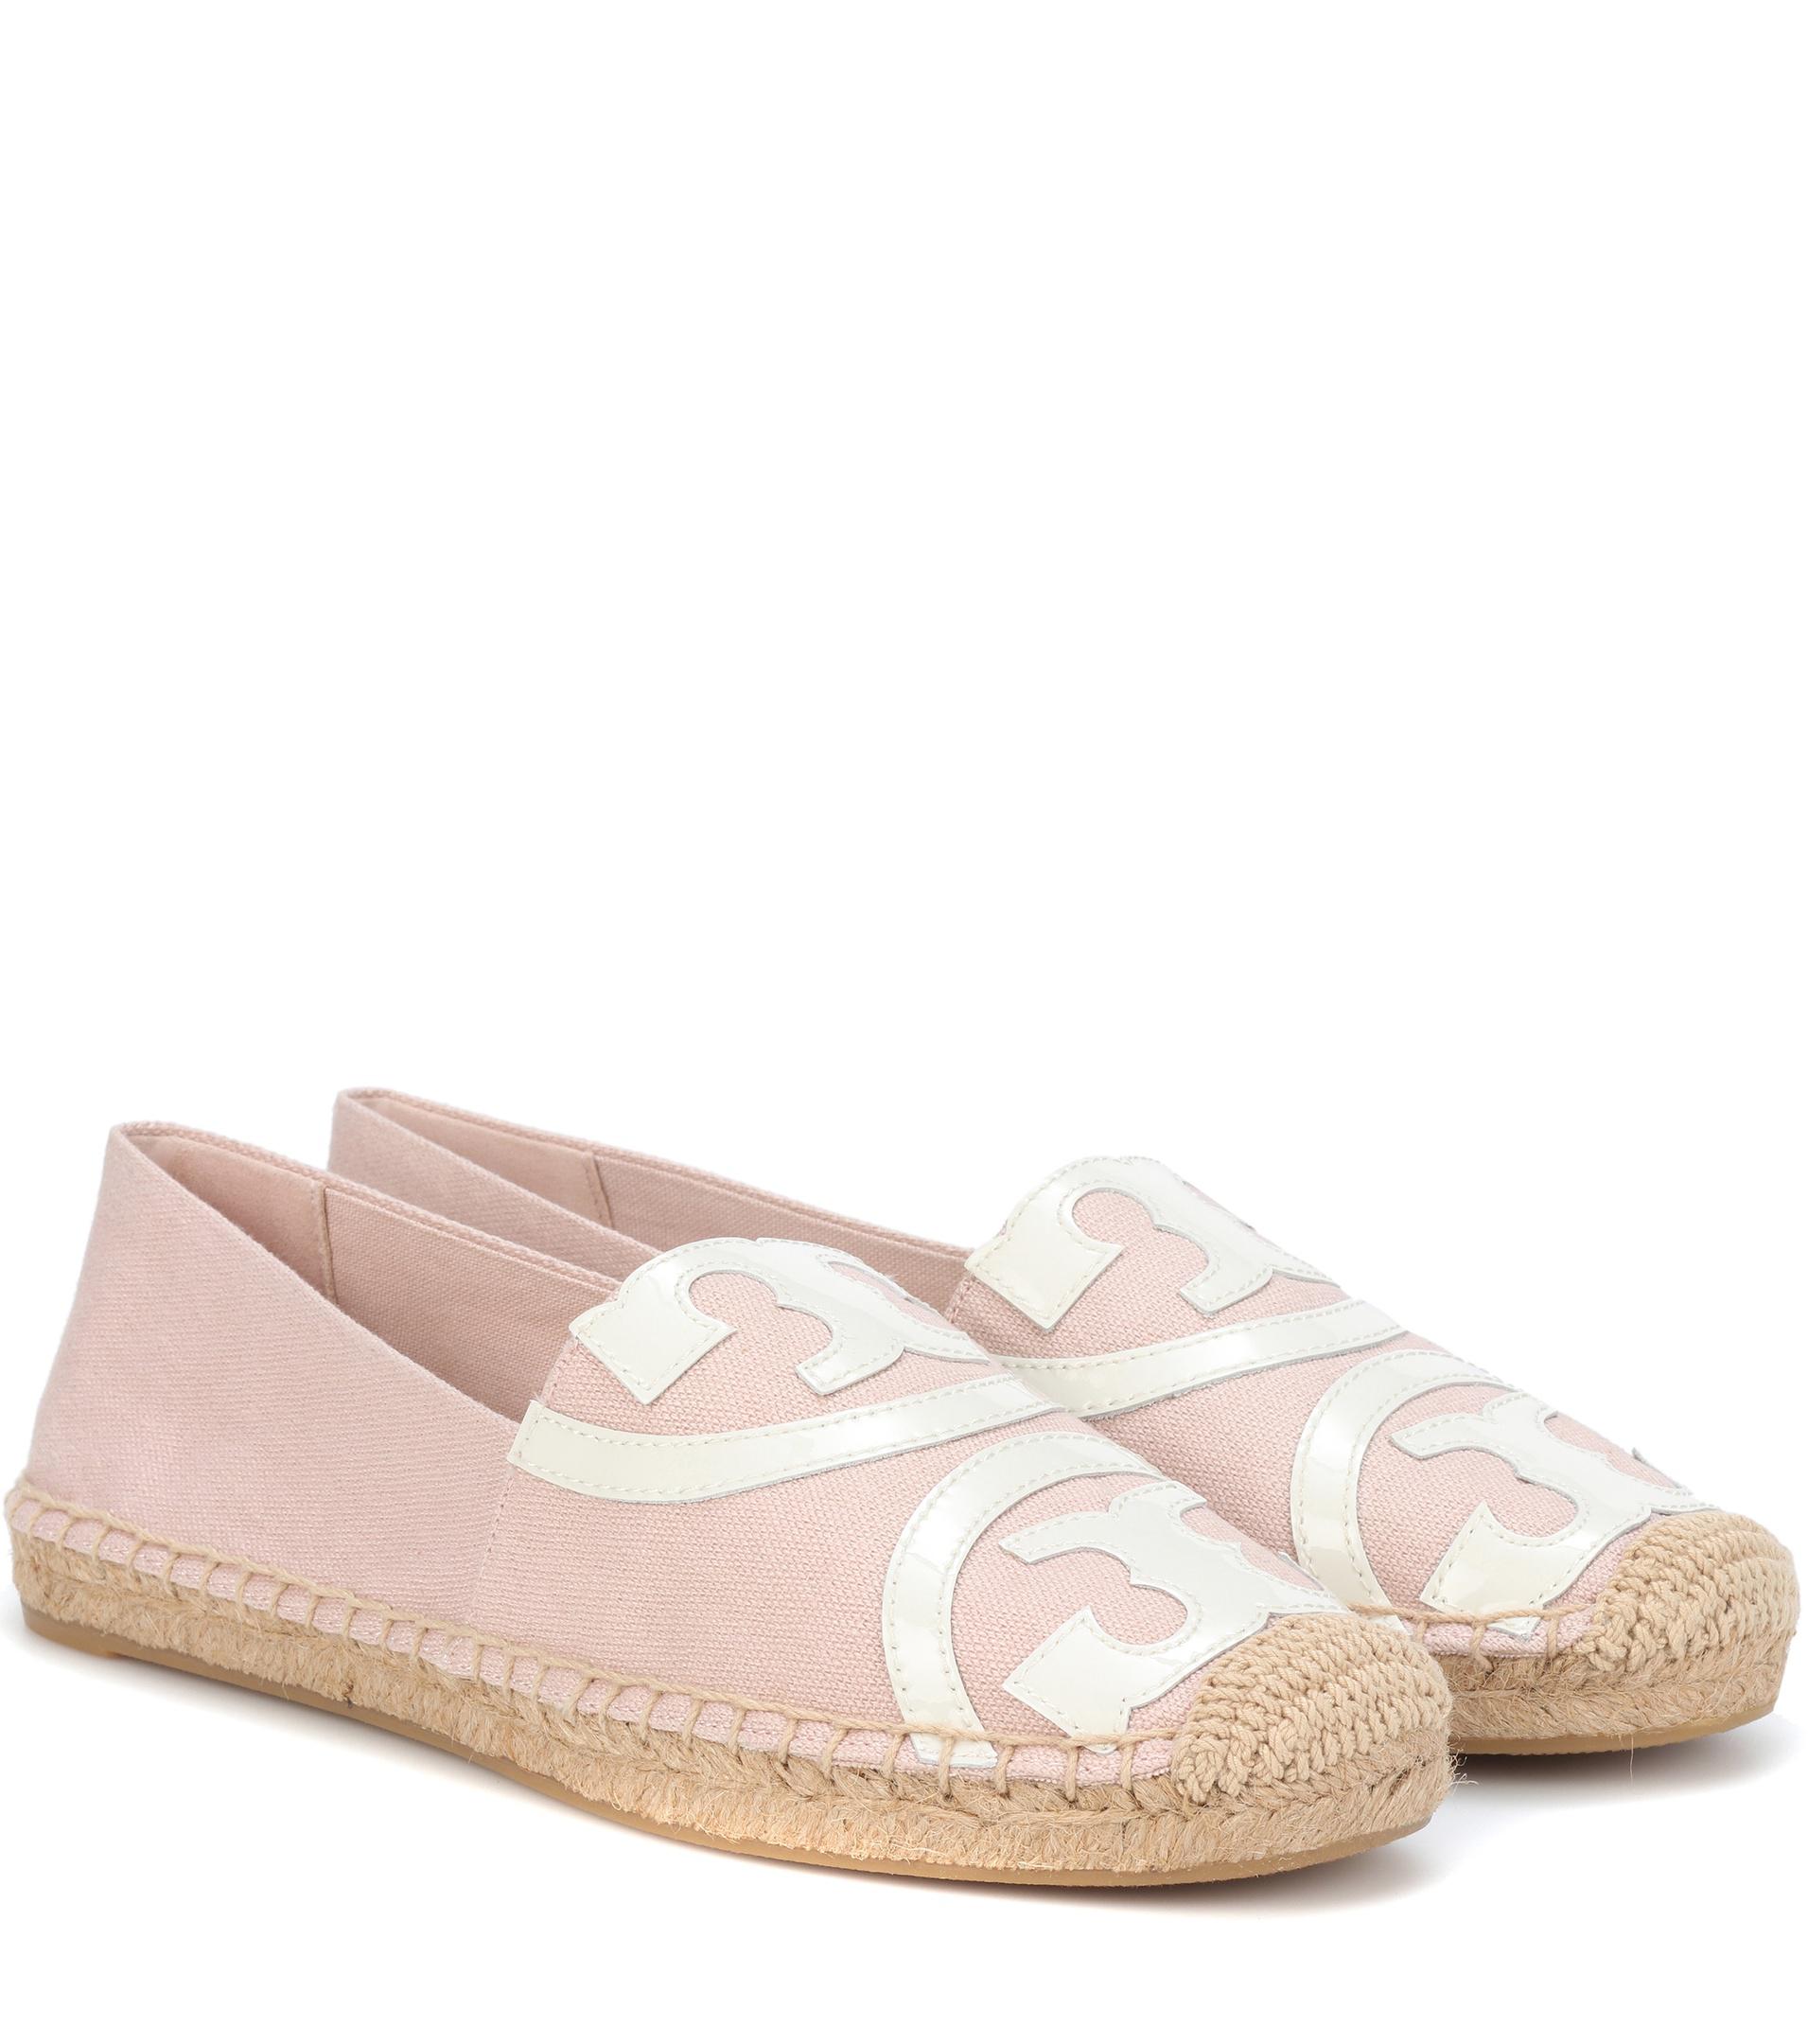 tory burch pink shoes